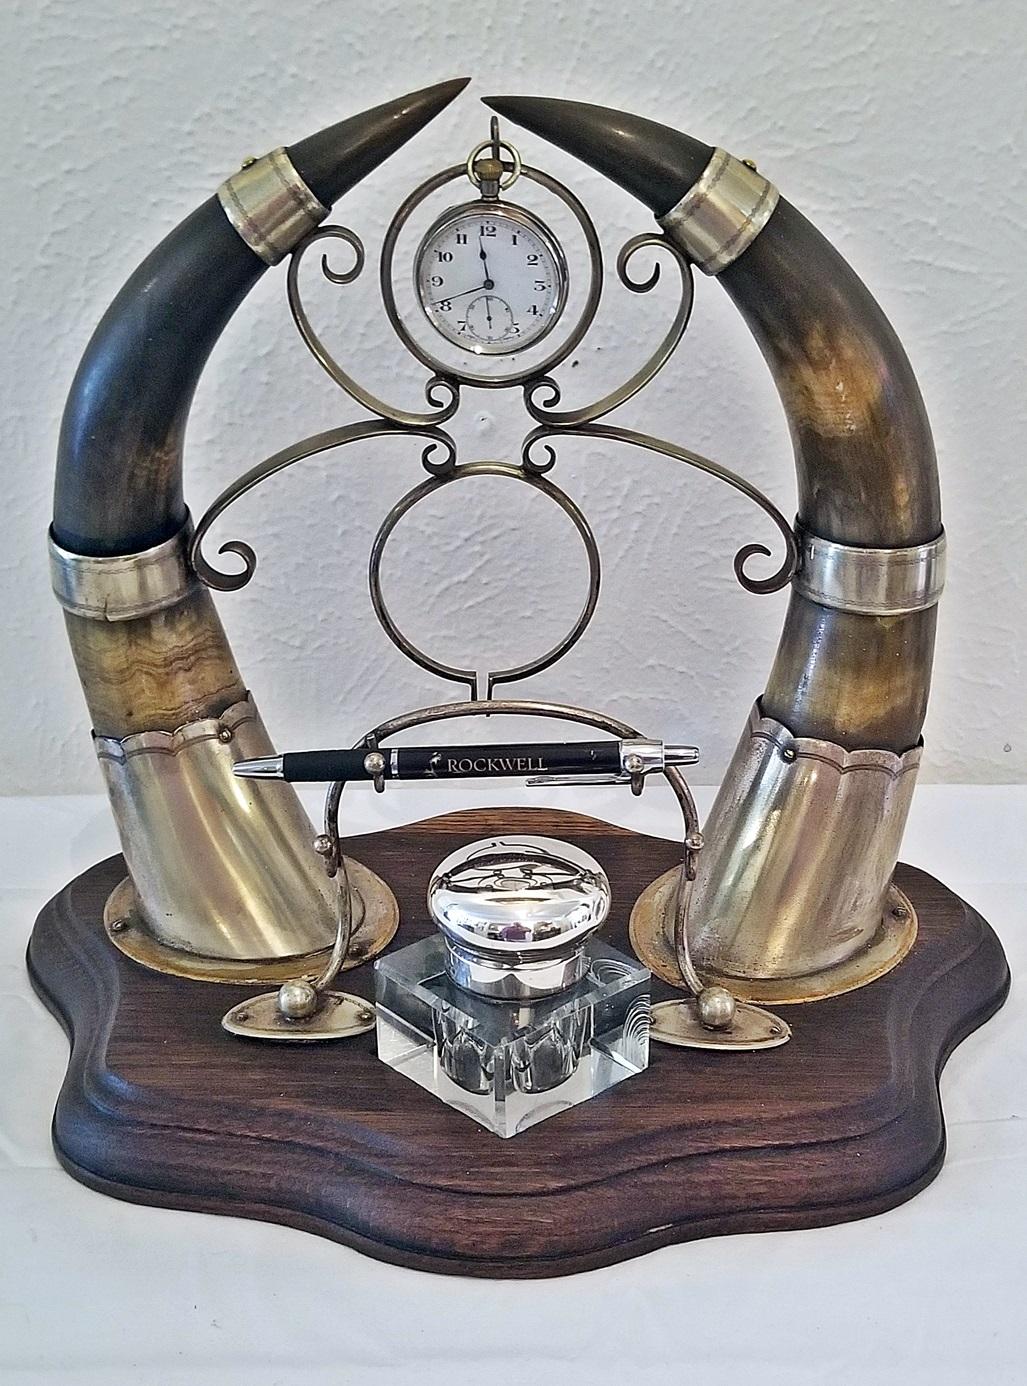 Ink Standish with solid oak base, two Highland cow horns form the centrepiece of this unusual and gorgeous display, leading to two rings for Pocket Watch & Fob display.

The horns are banded in old plated silver and the stand for writing pens or